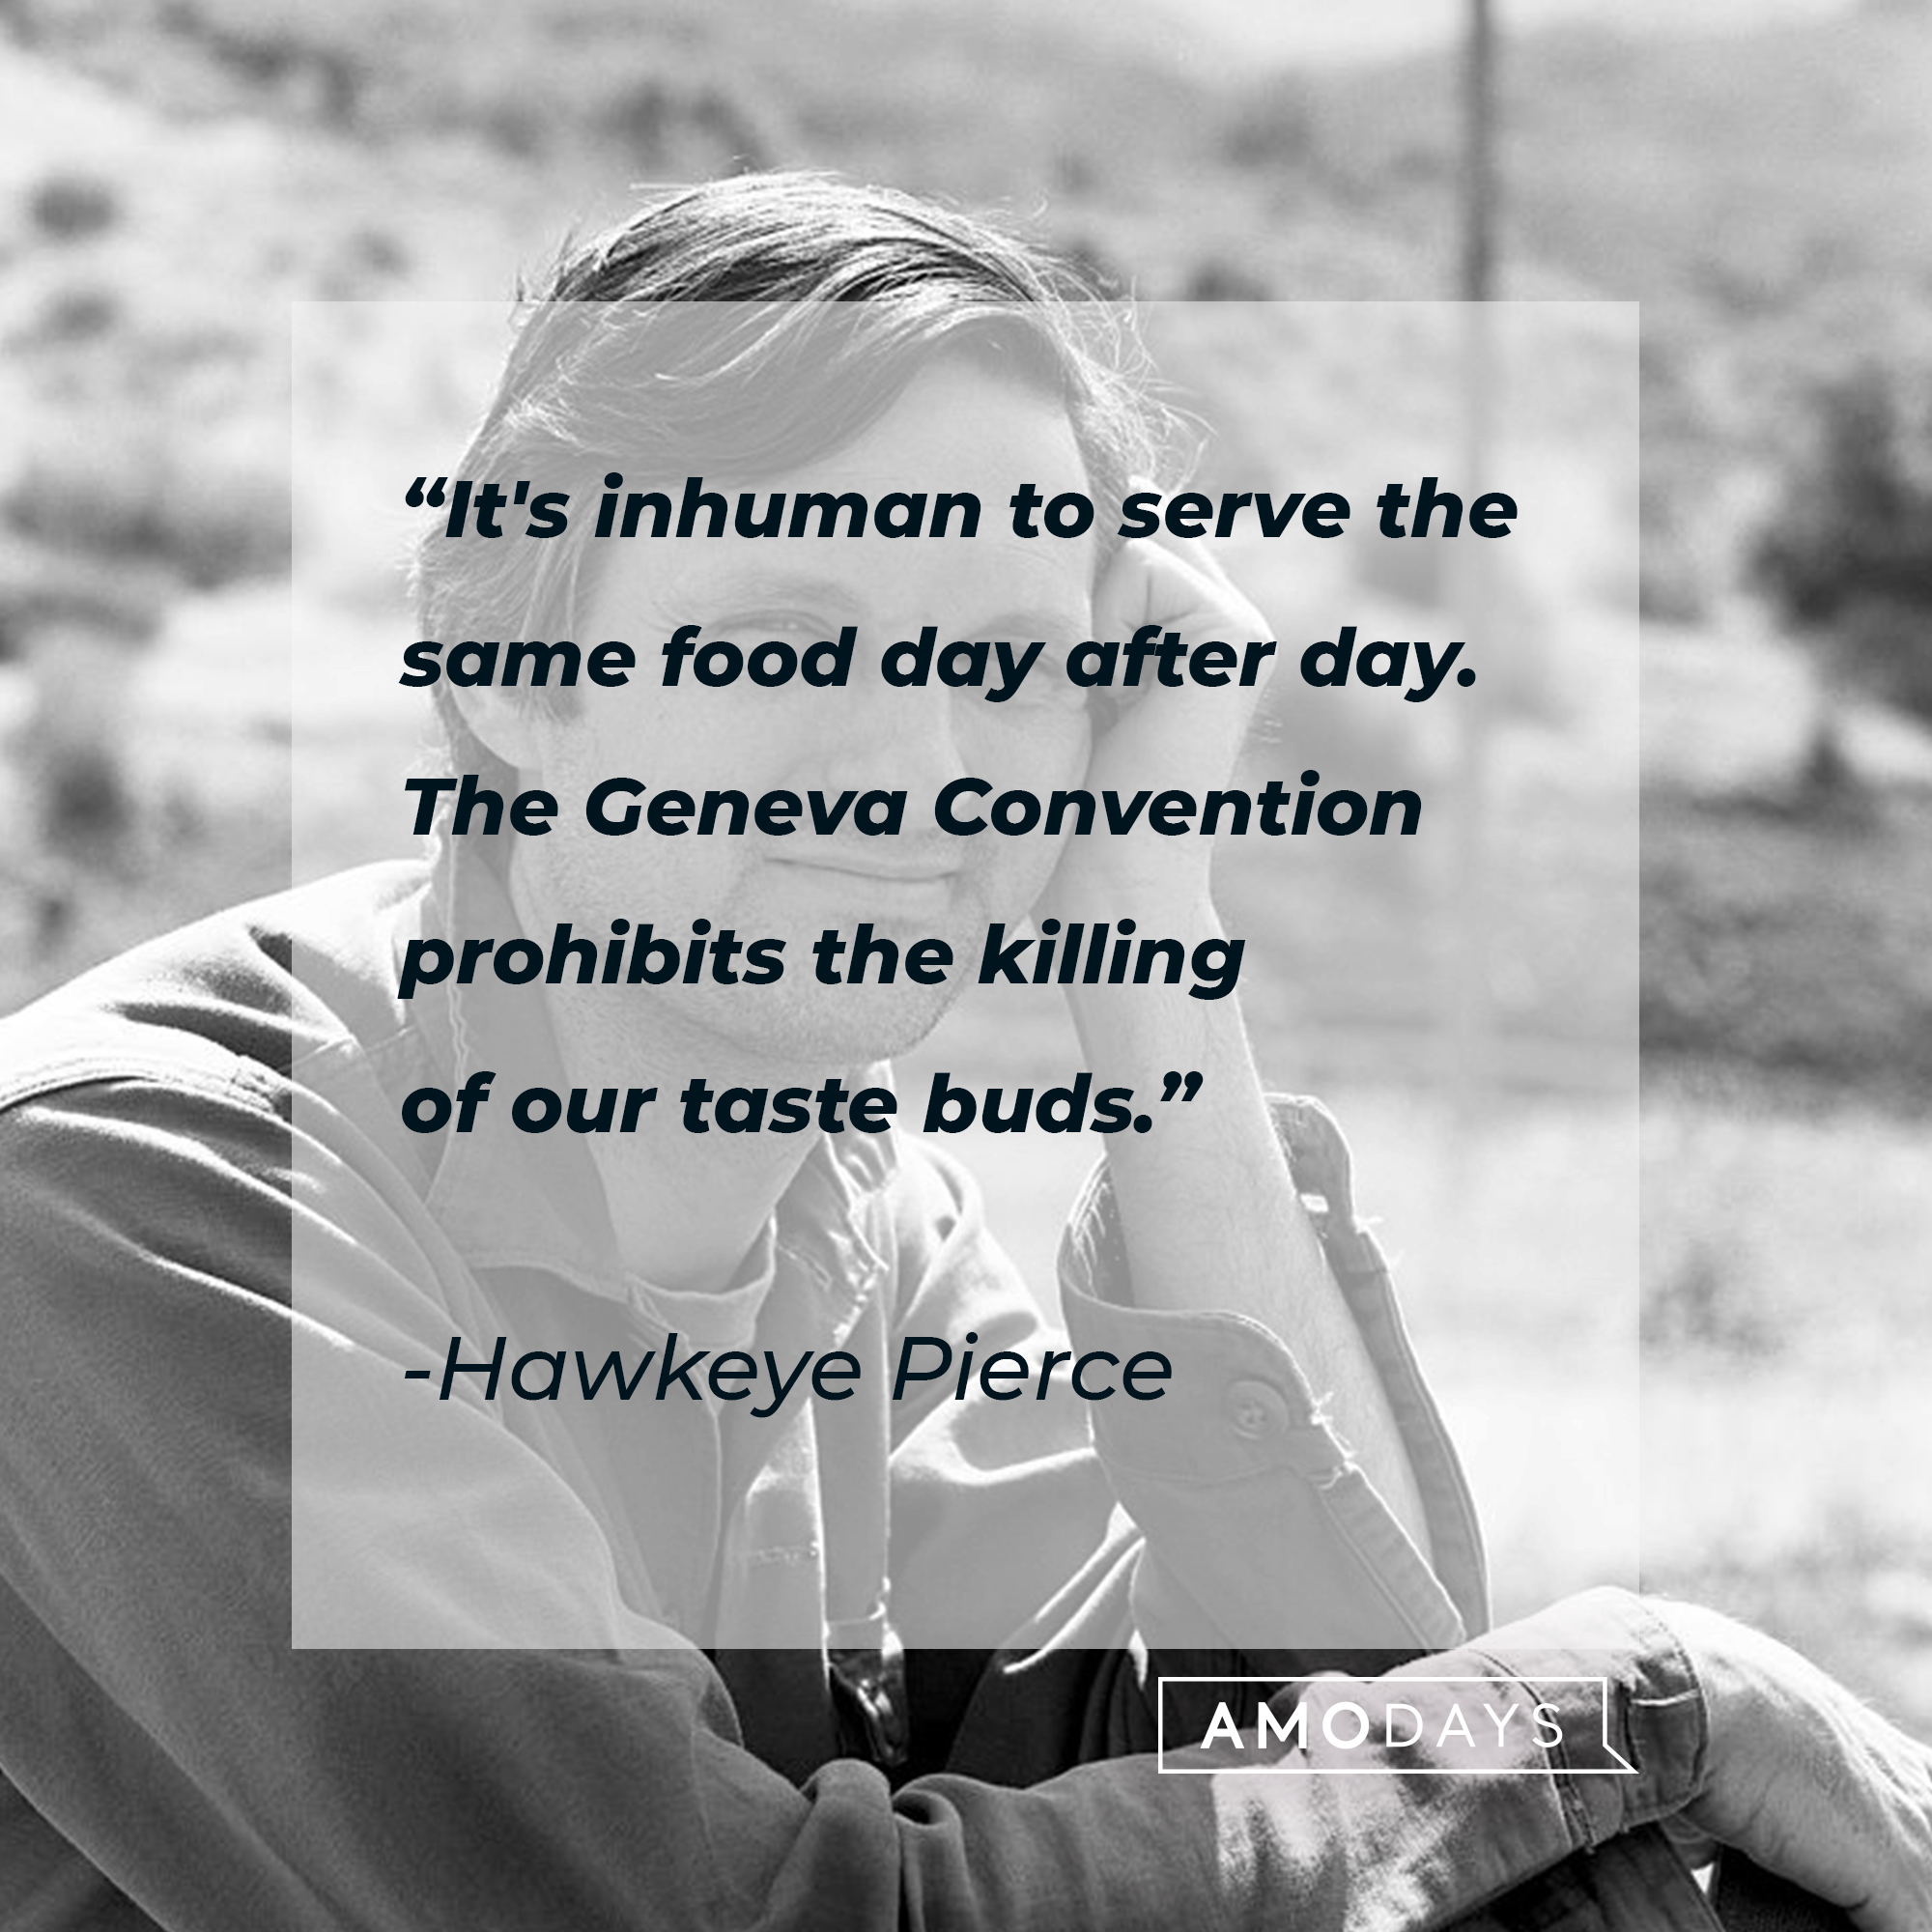 Hawkeye Pierce's quote: "It's inhuman to serve the same food day after day. The Geneva Convention prohibits the killing of our taste buds." | Source: Getty Images